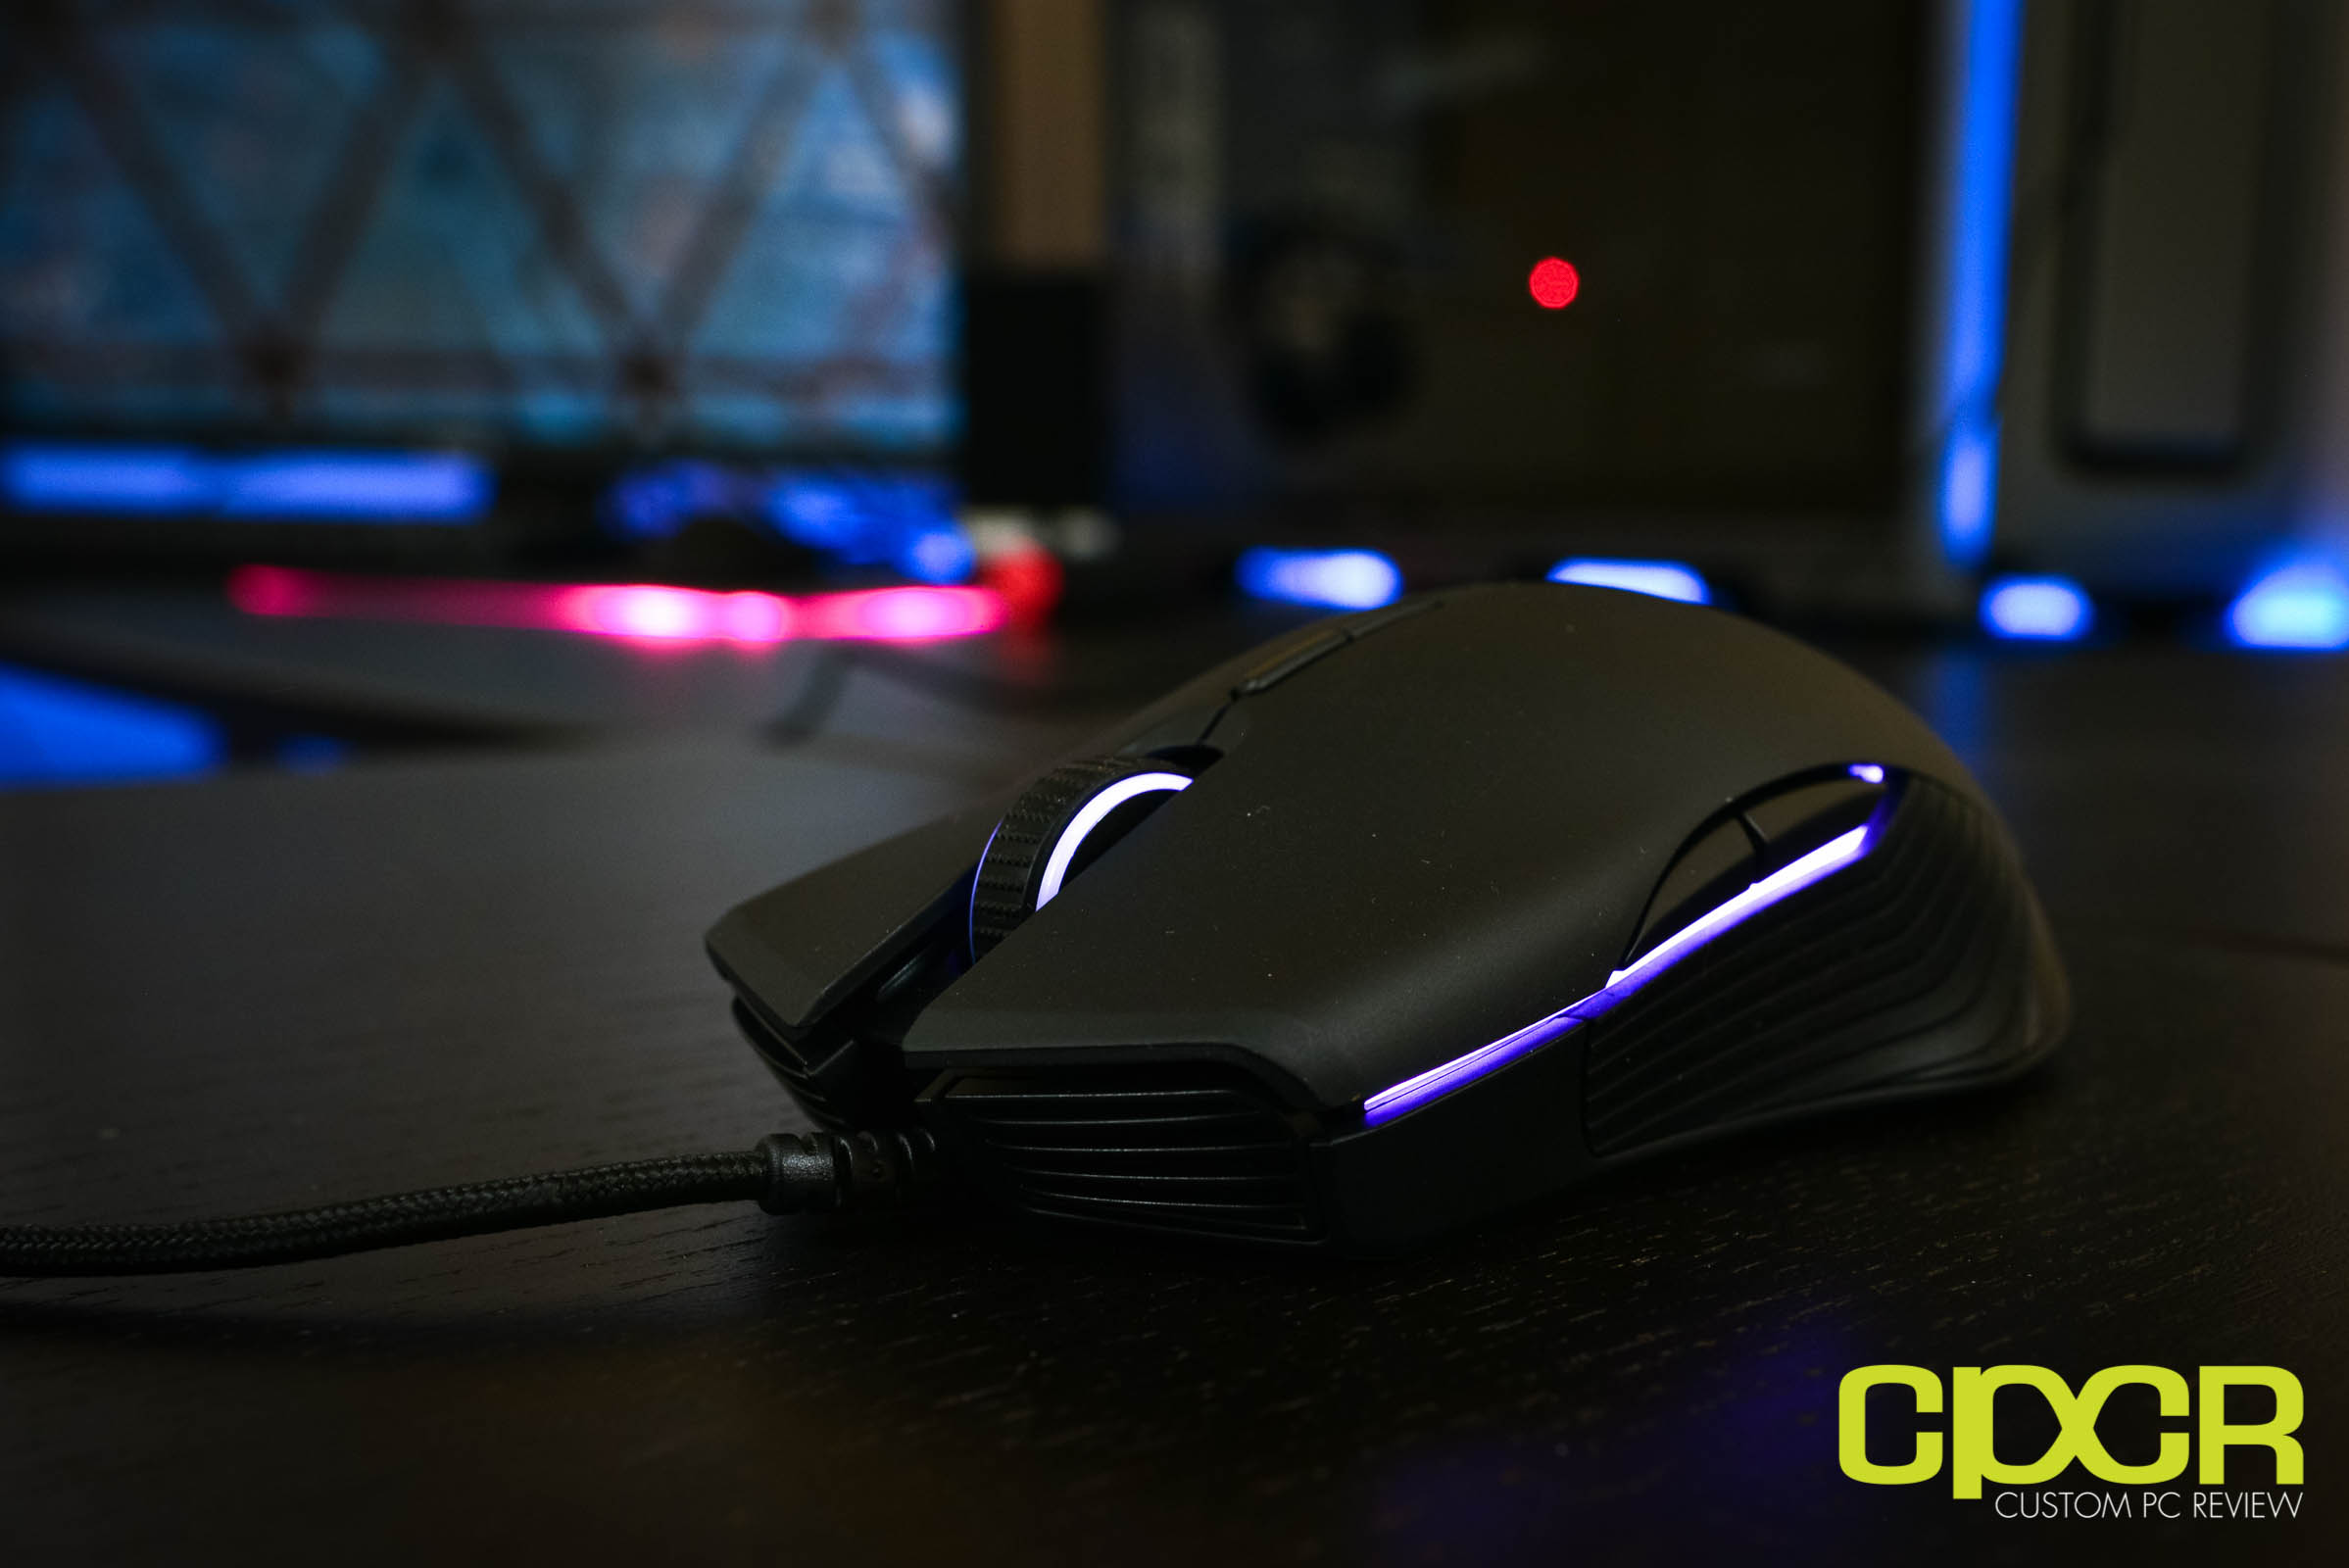 The Best Gaming Mouse of 2019